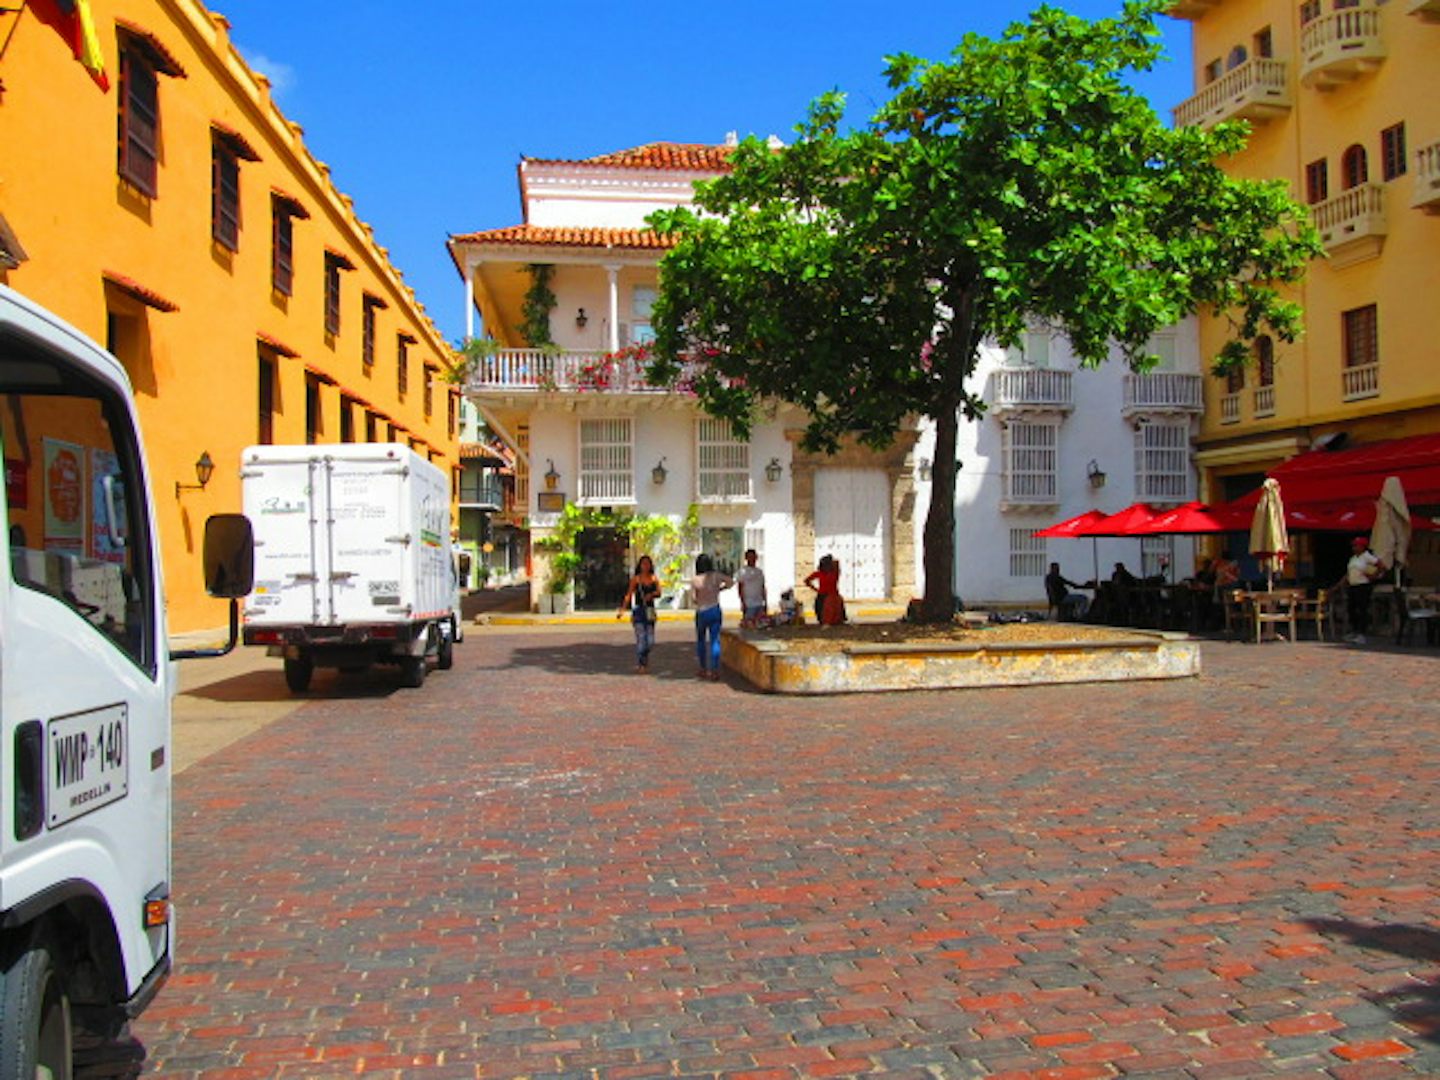 Walled City in Cartagena